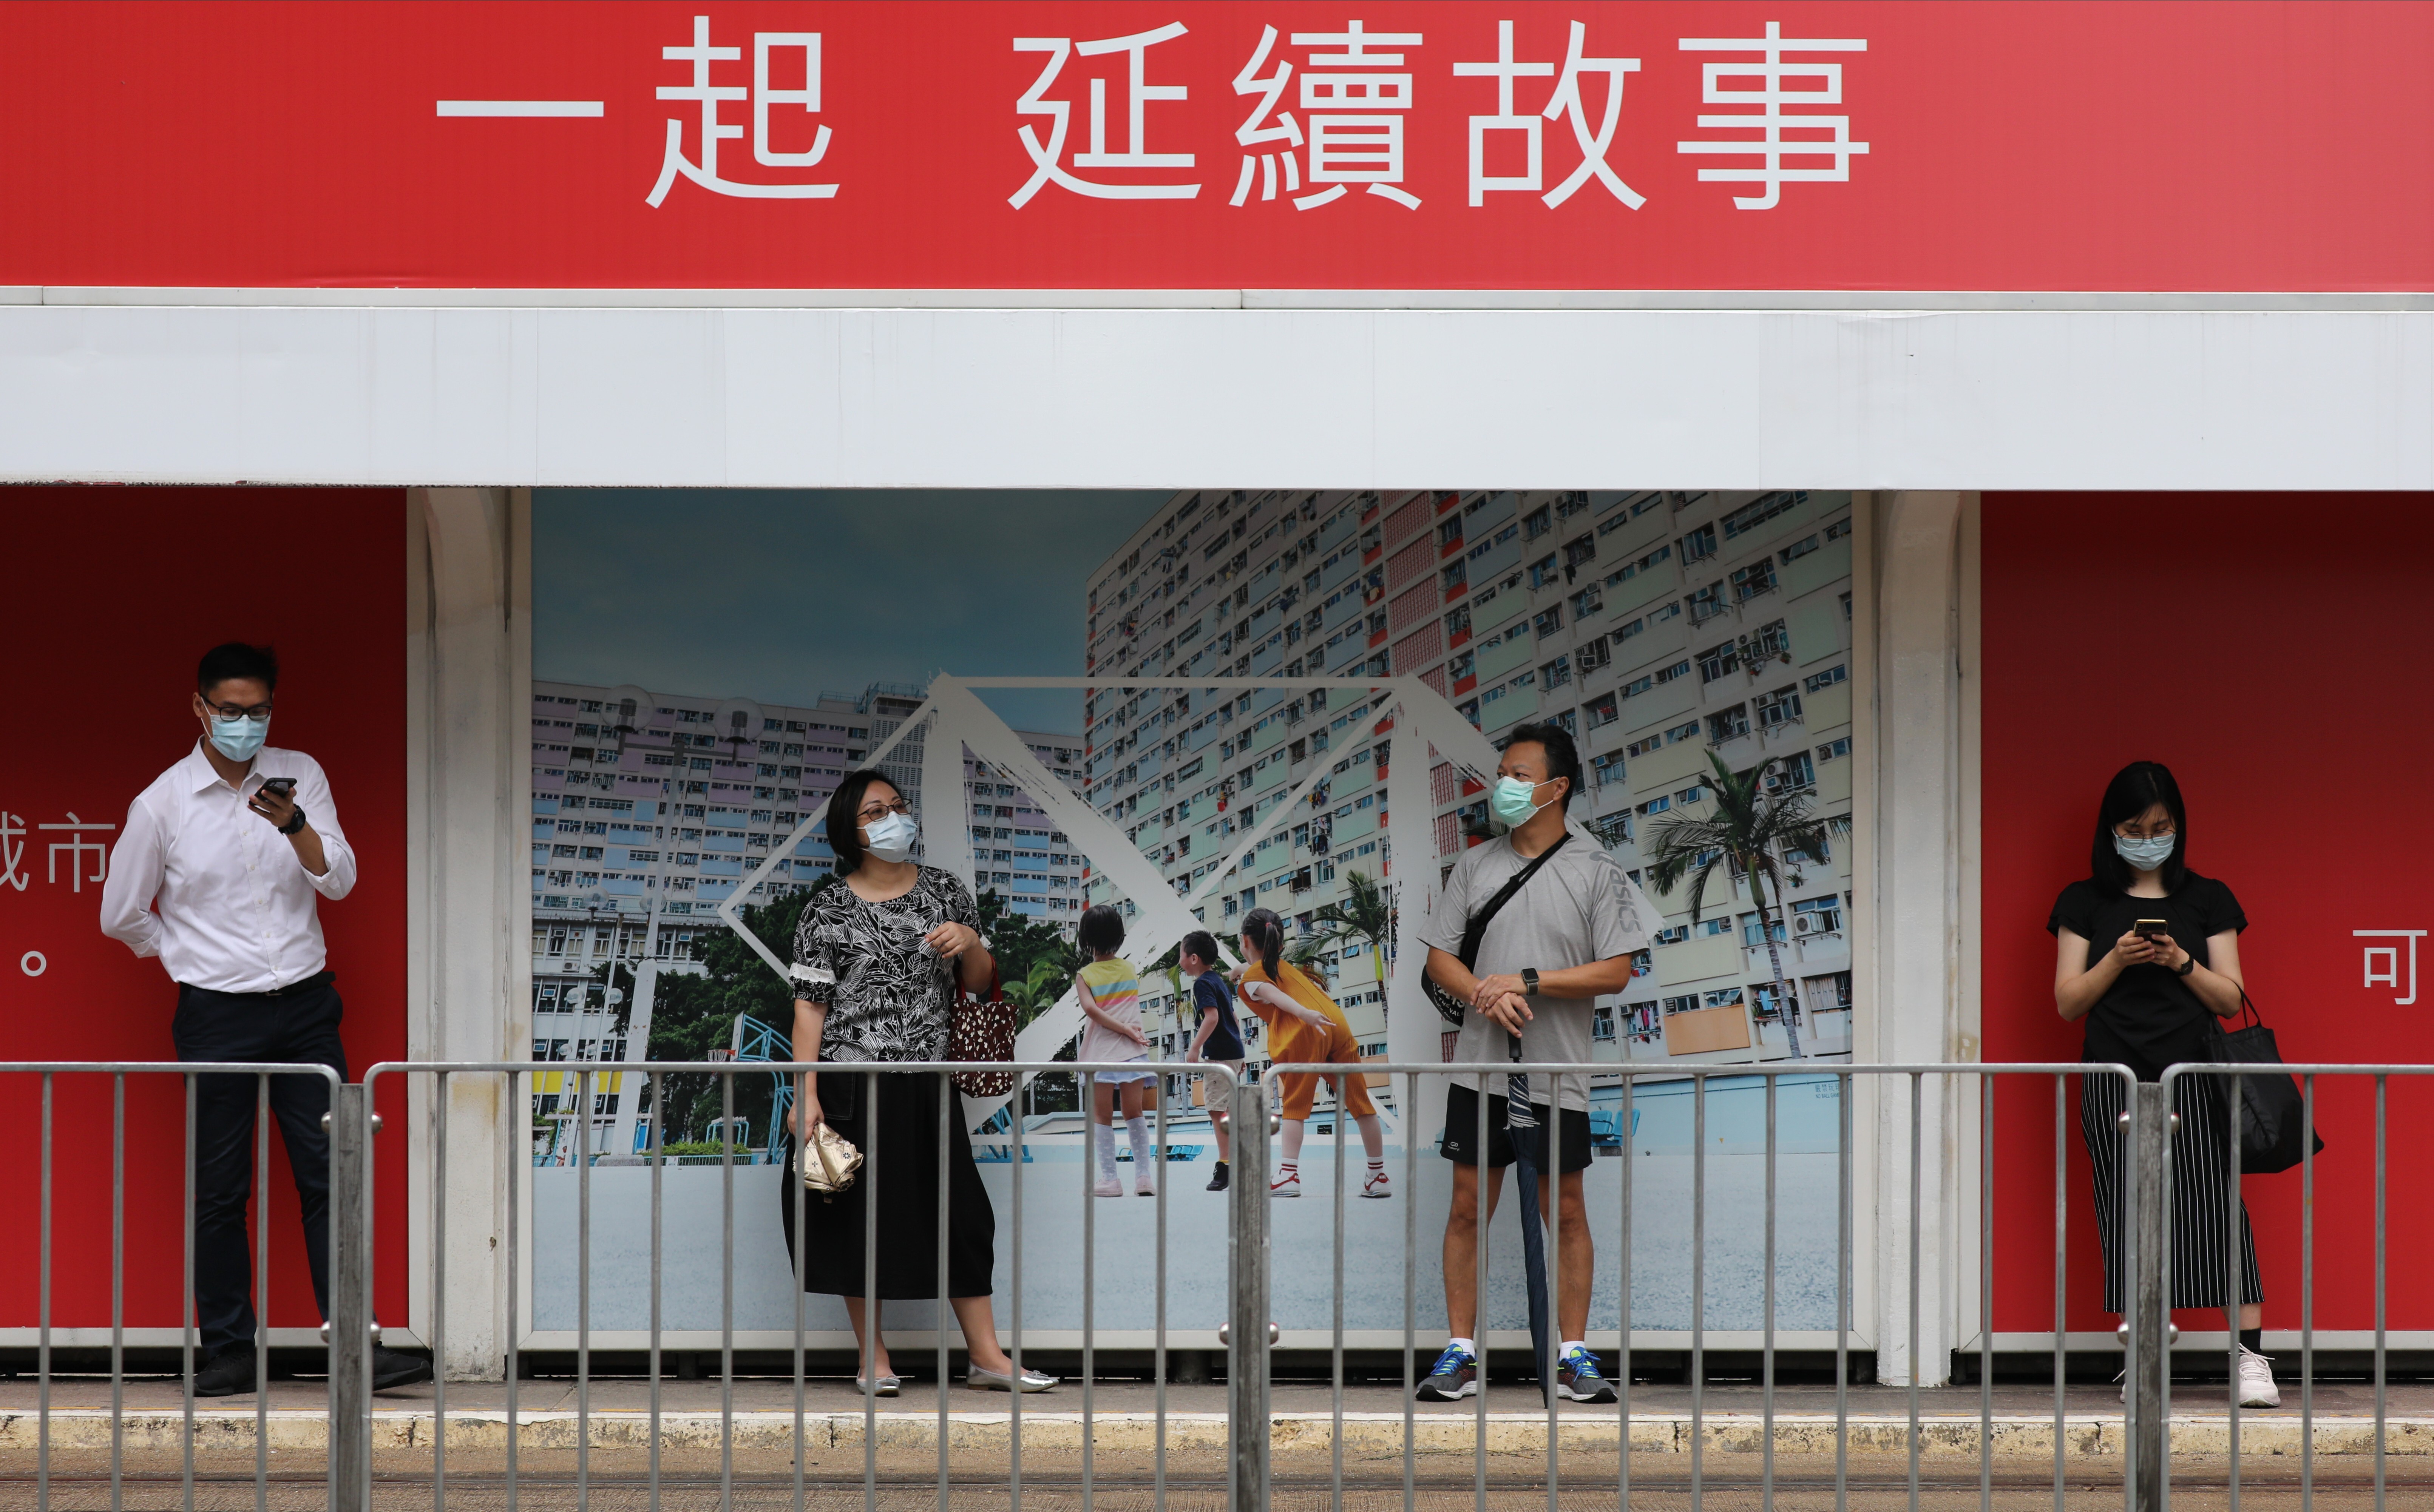 Hongkongers wait for a tram in front of a HSBC advertisement in Central on September 28. Photo: Nora Tam